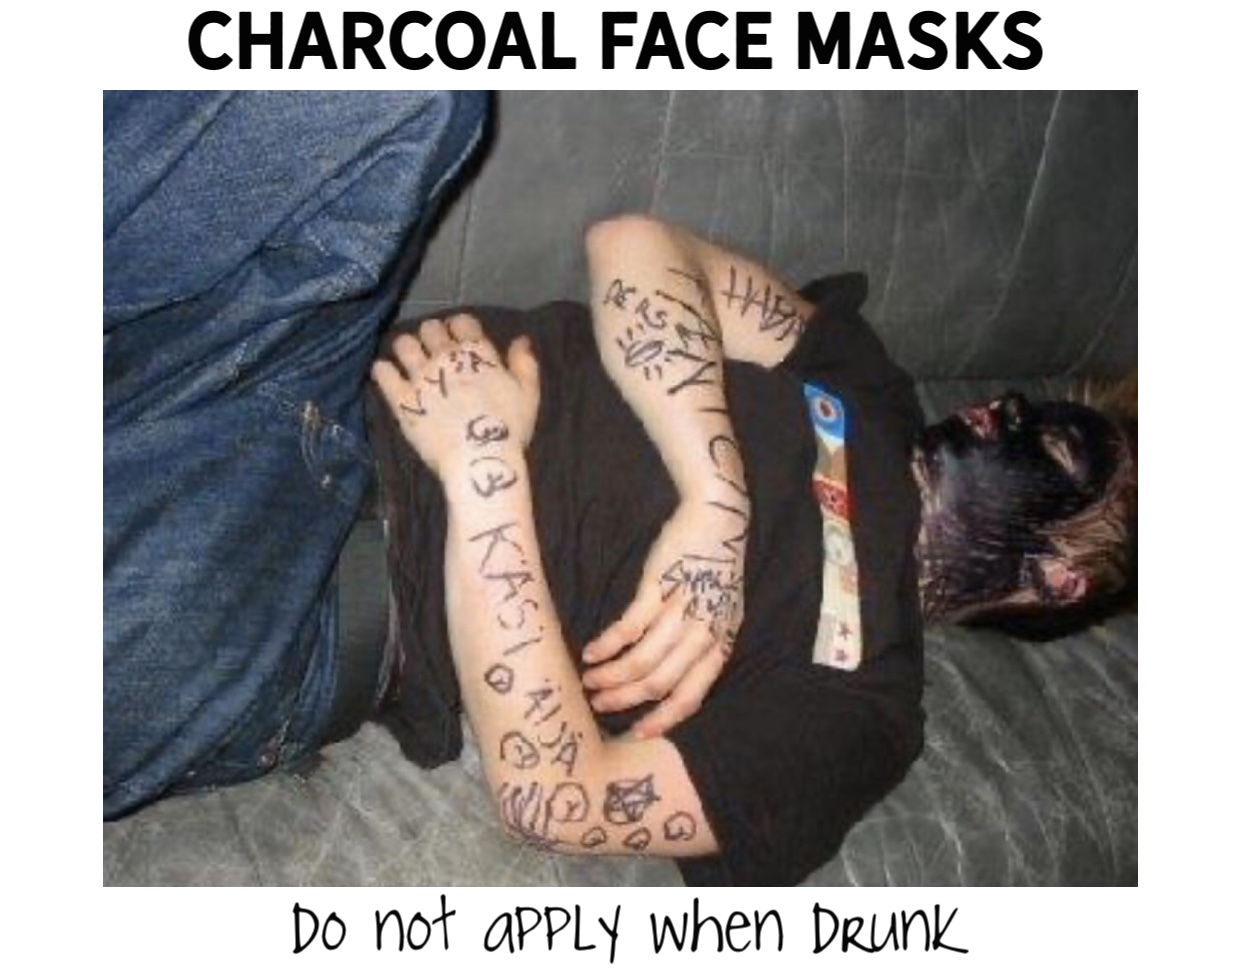 sleep during party - Charcoal Face Masks 33 Kastas Do not aPPLY when Drunk